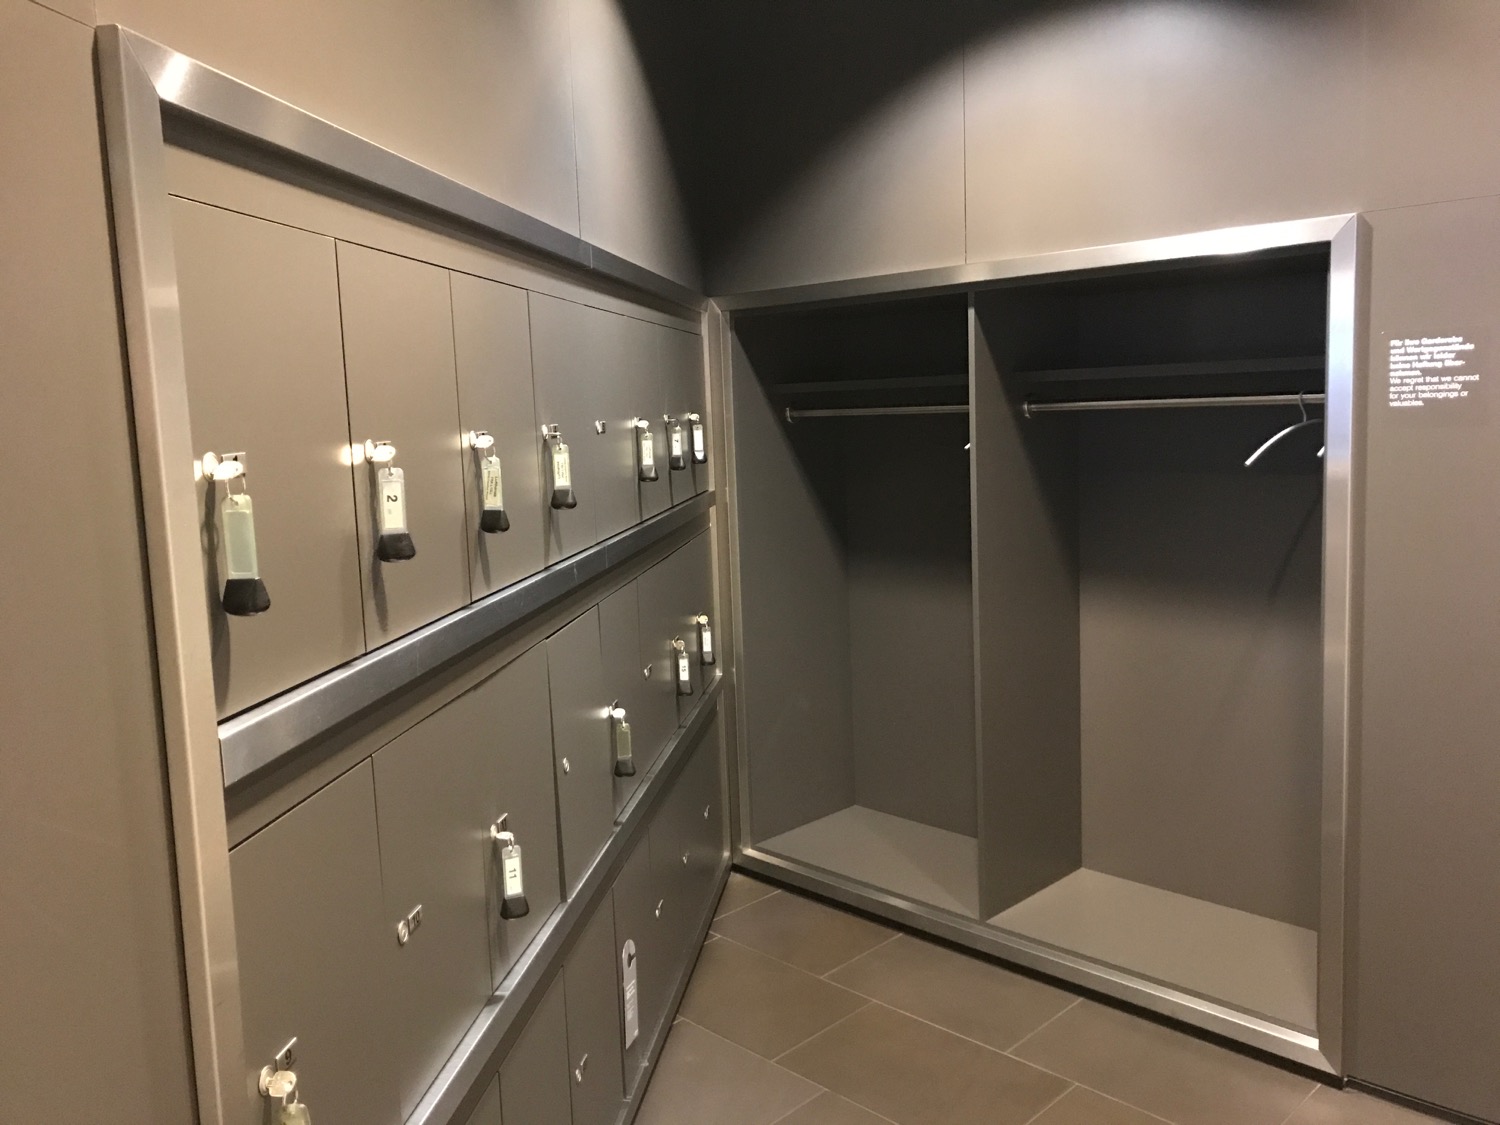 a lockers in a room